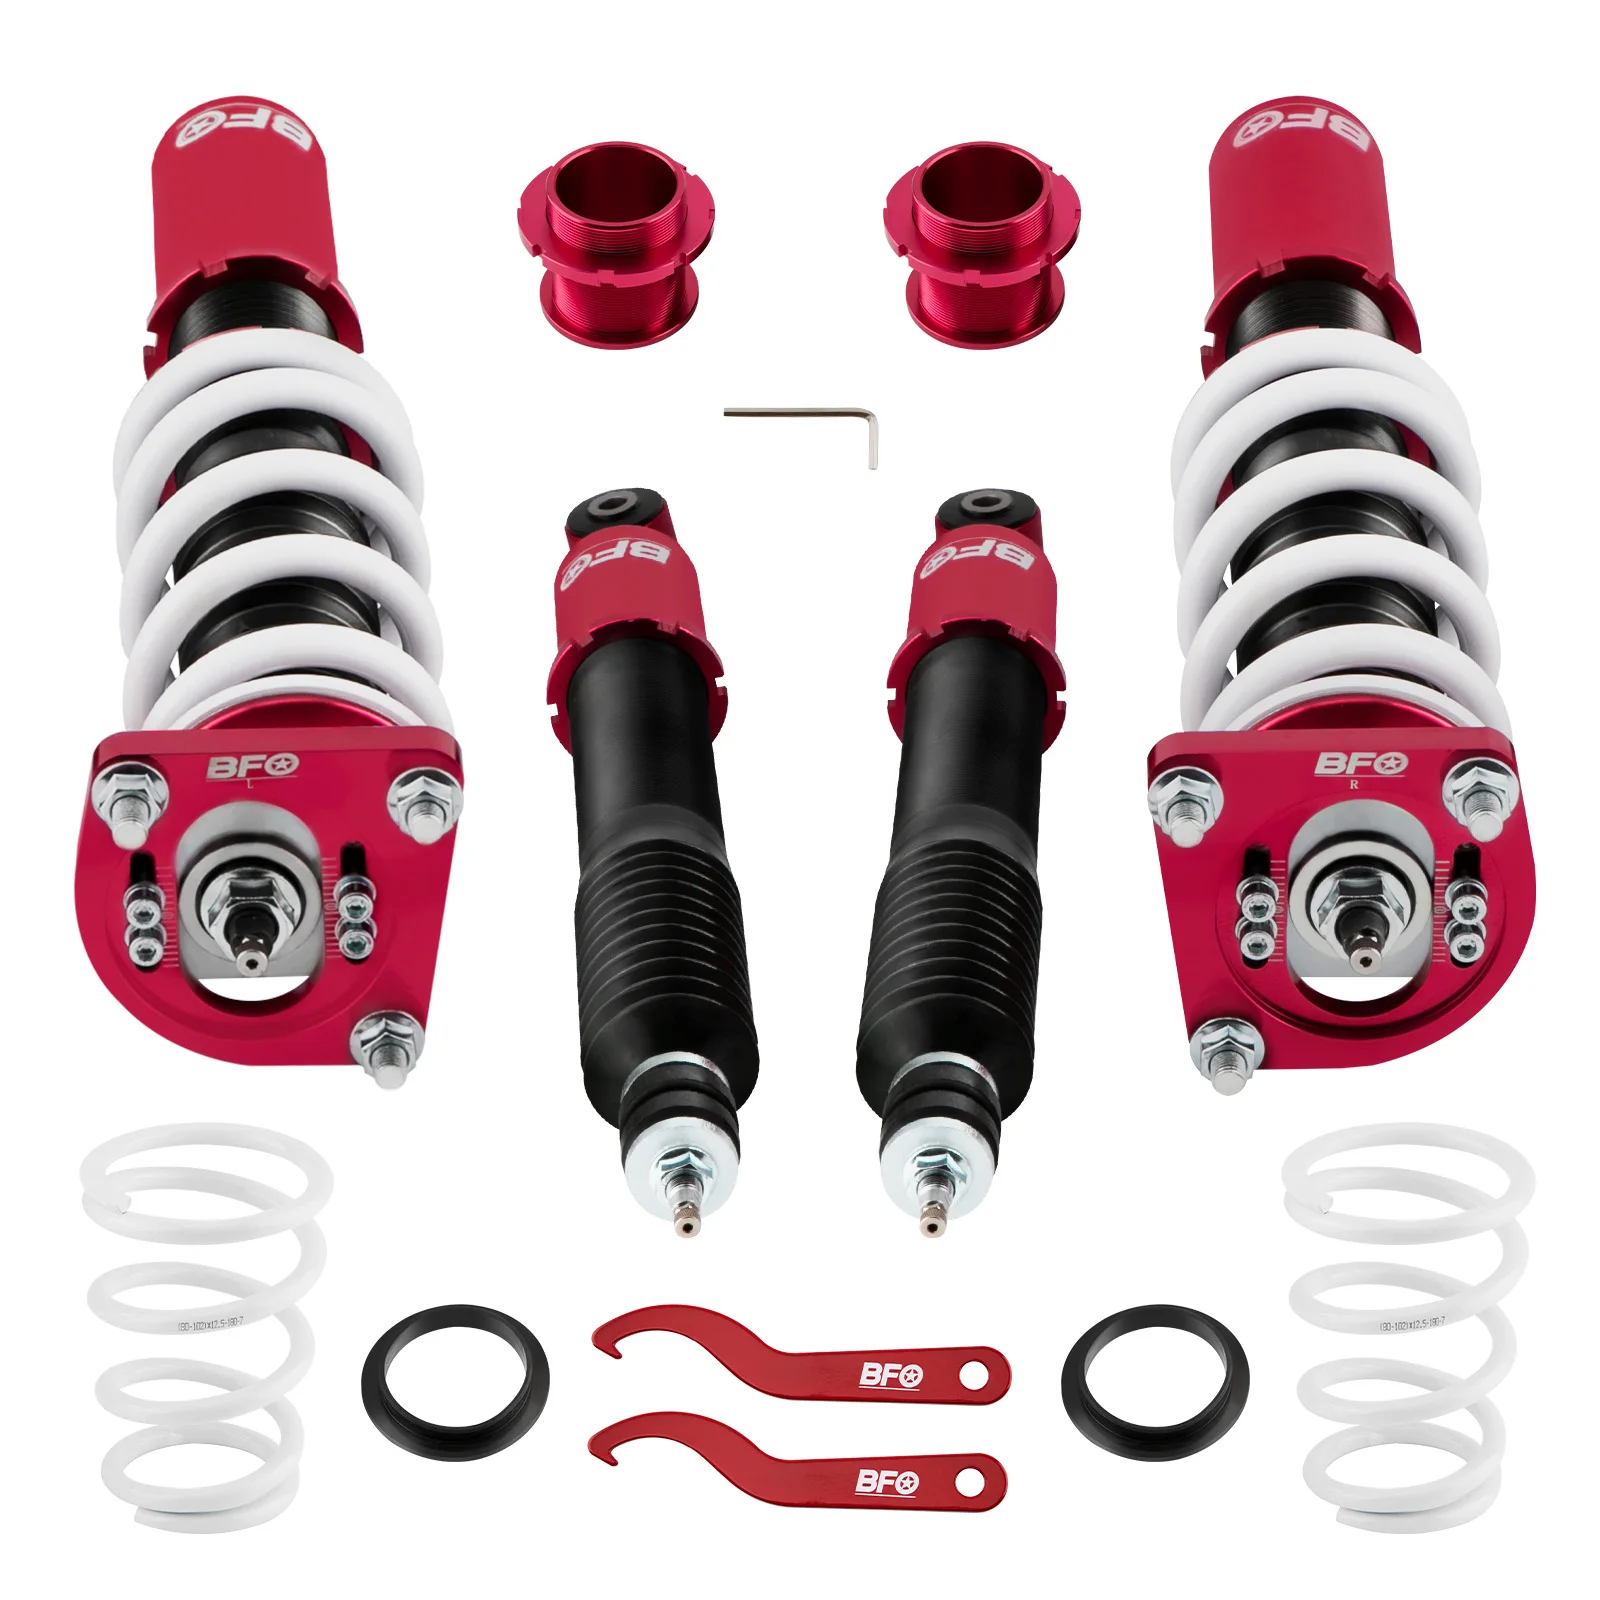 

Coilover Adjustable Height Shock Absorber for Ford Mustang 4th 94-04 Suspension Lowering Shocks Absorbers Shocks Struts Kit